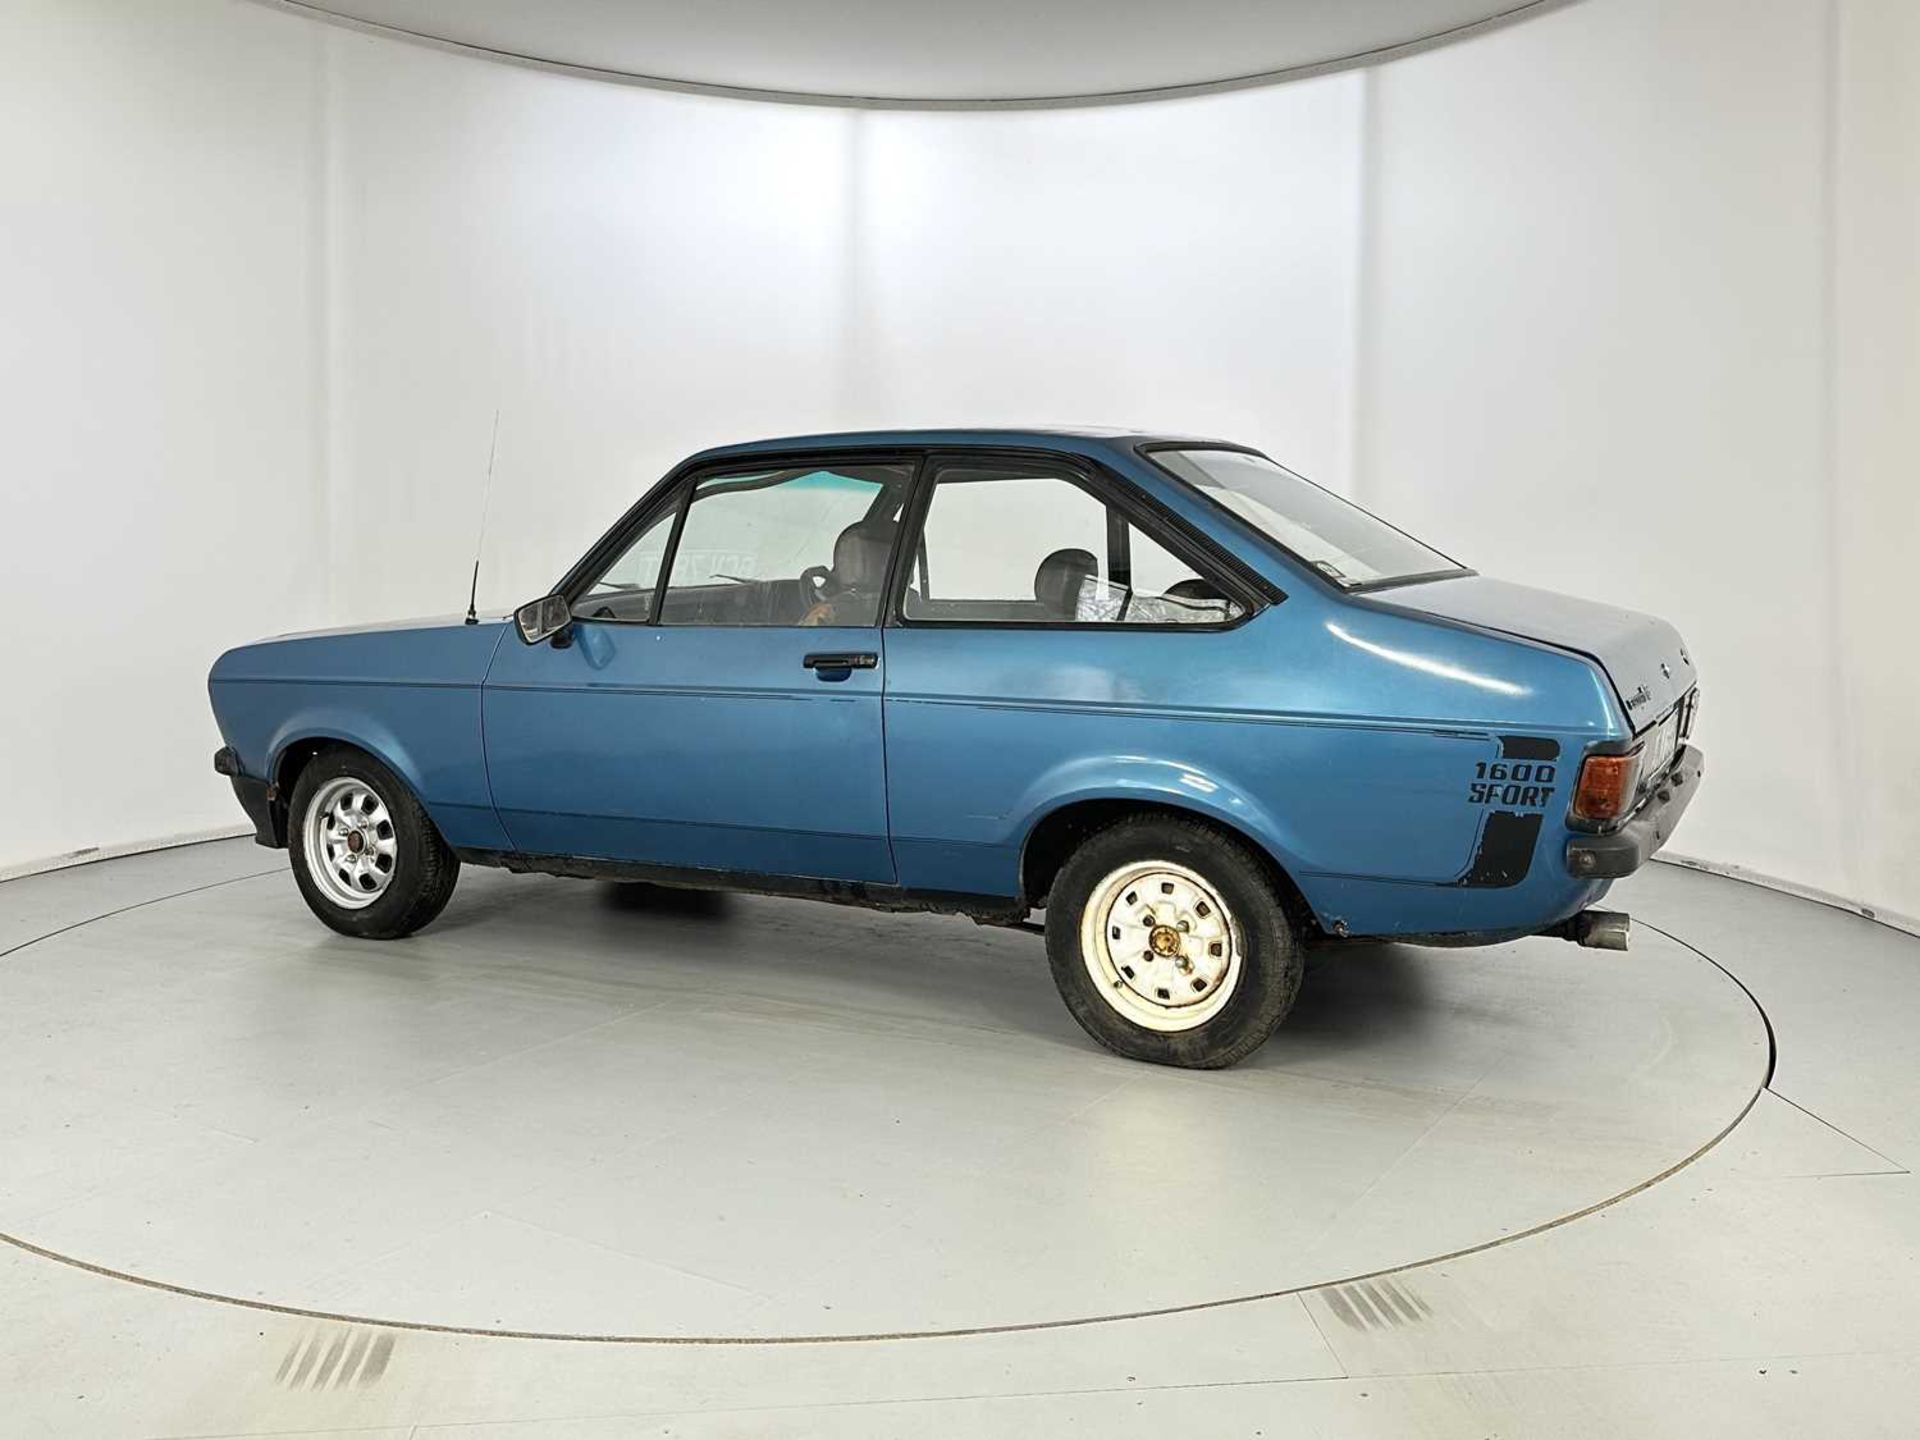 1979 Ford Escort 1600 Sport - Image 6 of 22